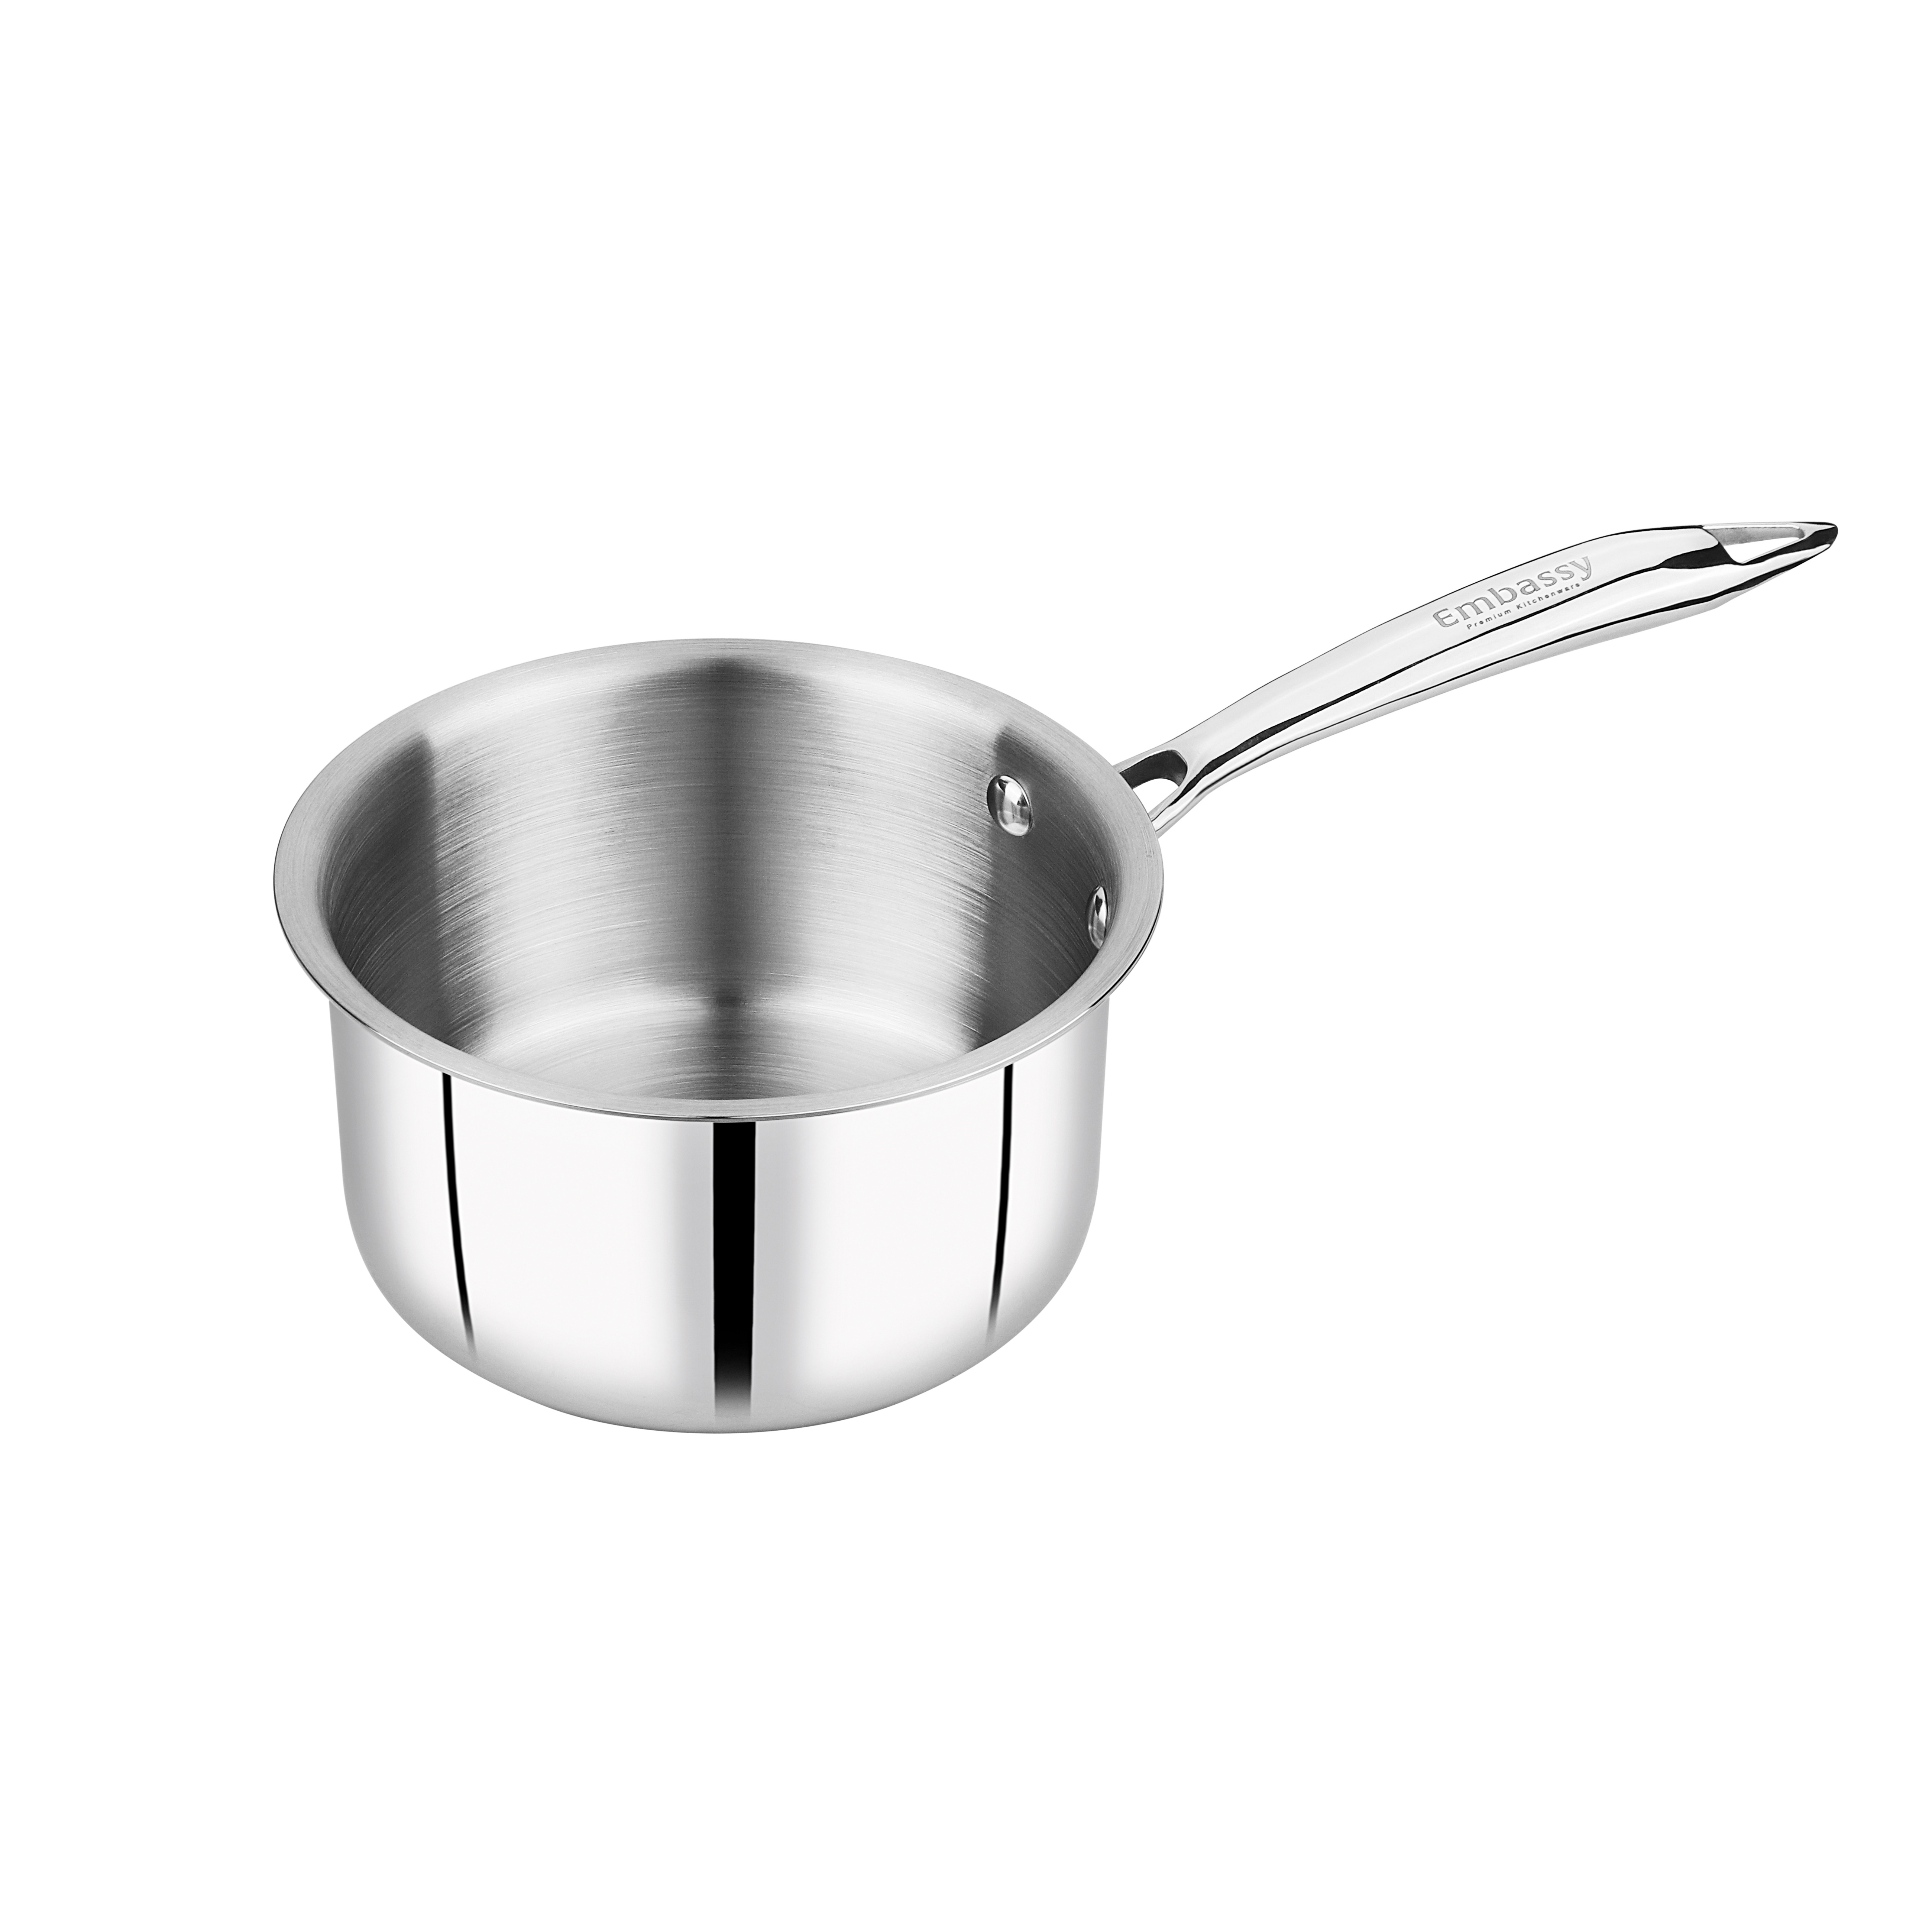 Embassy Stainless Steel Thickply Saucepan With Lid 12cm - Size 9